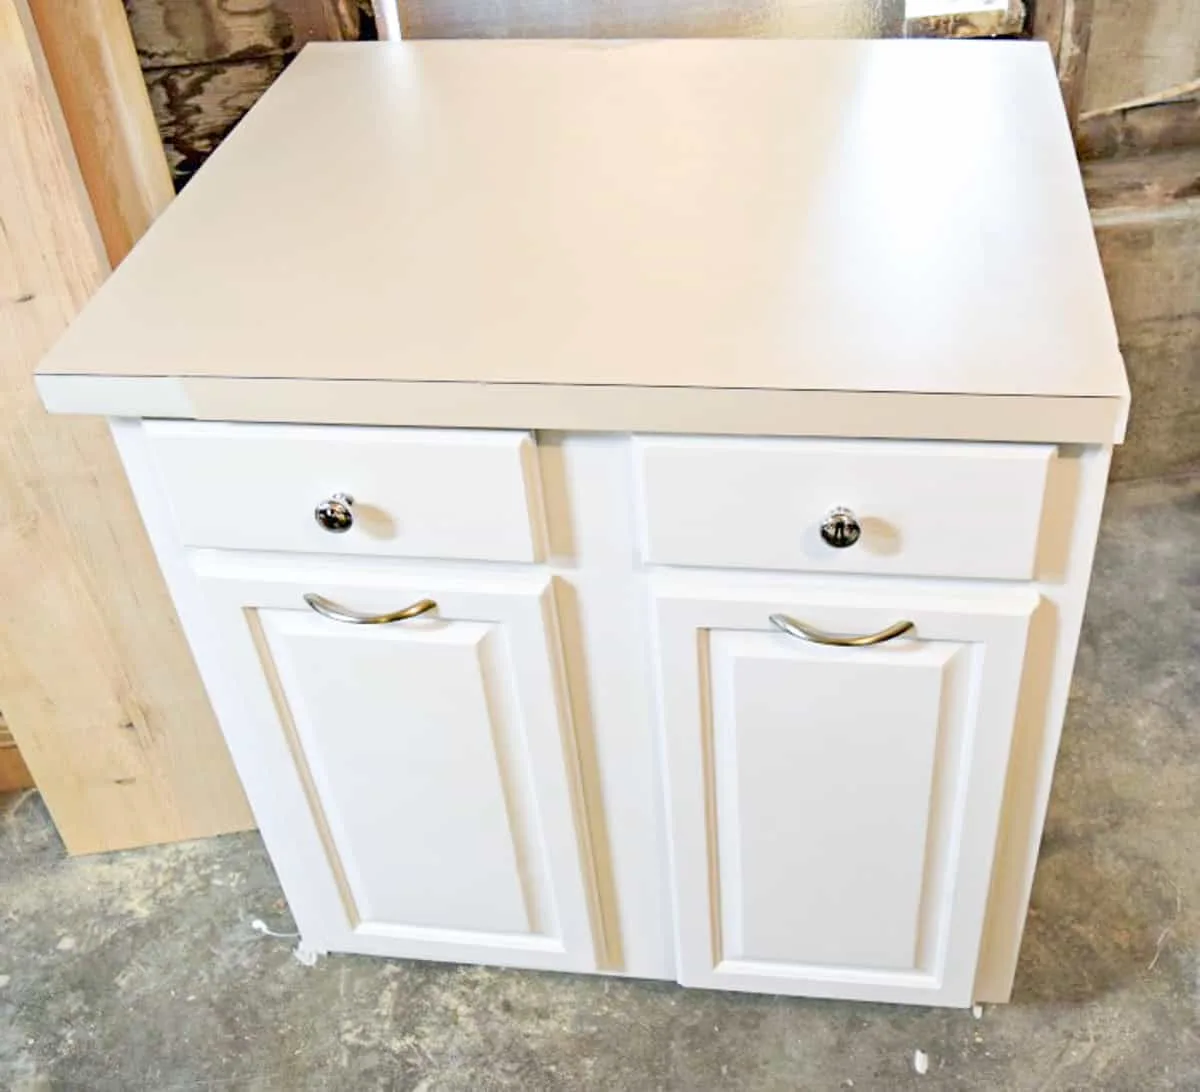 repaired formica countertop on used kitchen cabinets